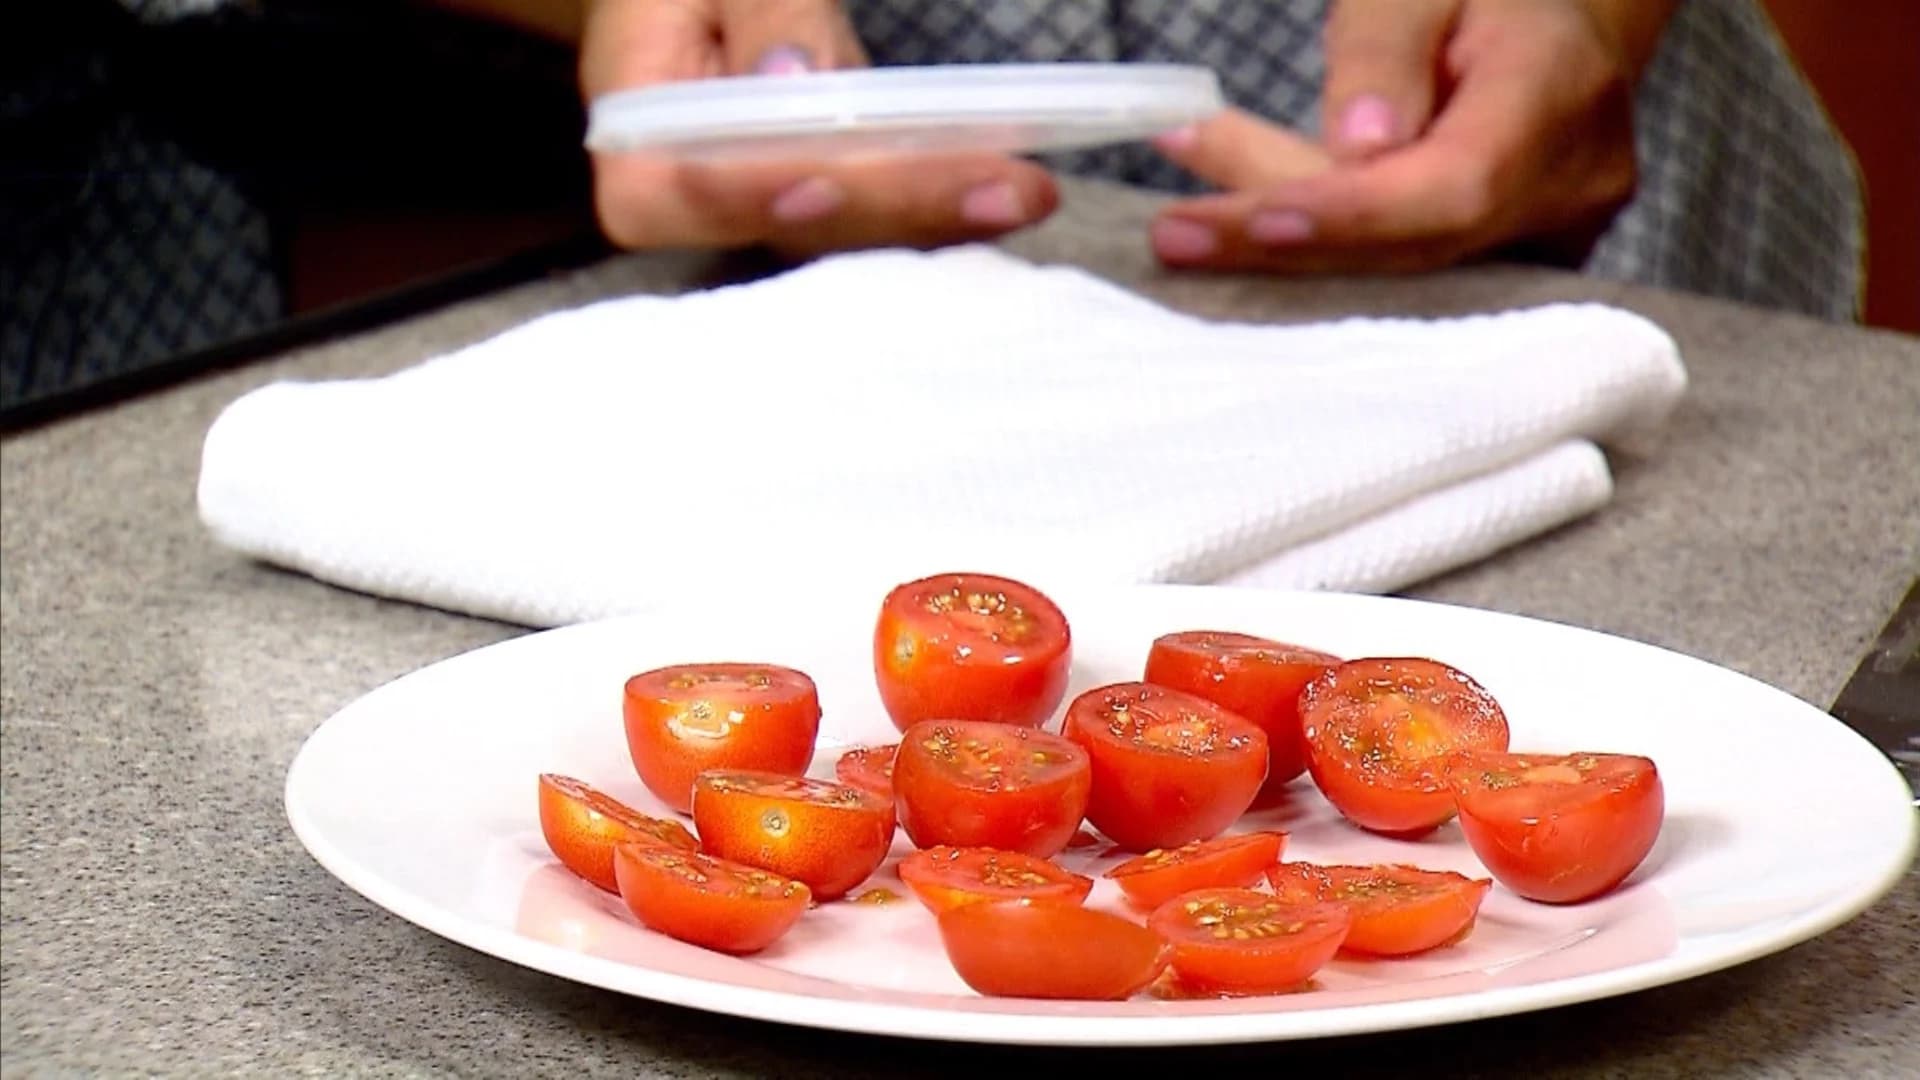 Chef's Quick Tip: Quick way to cut tomatoes